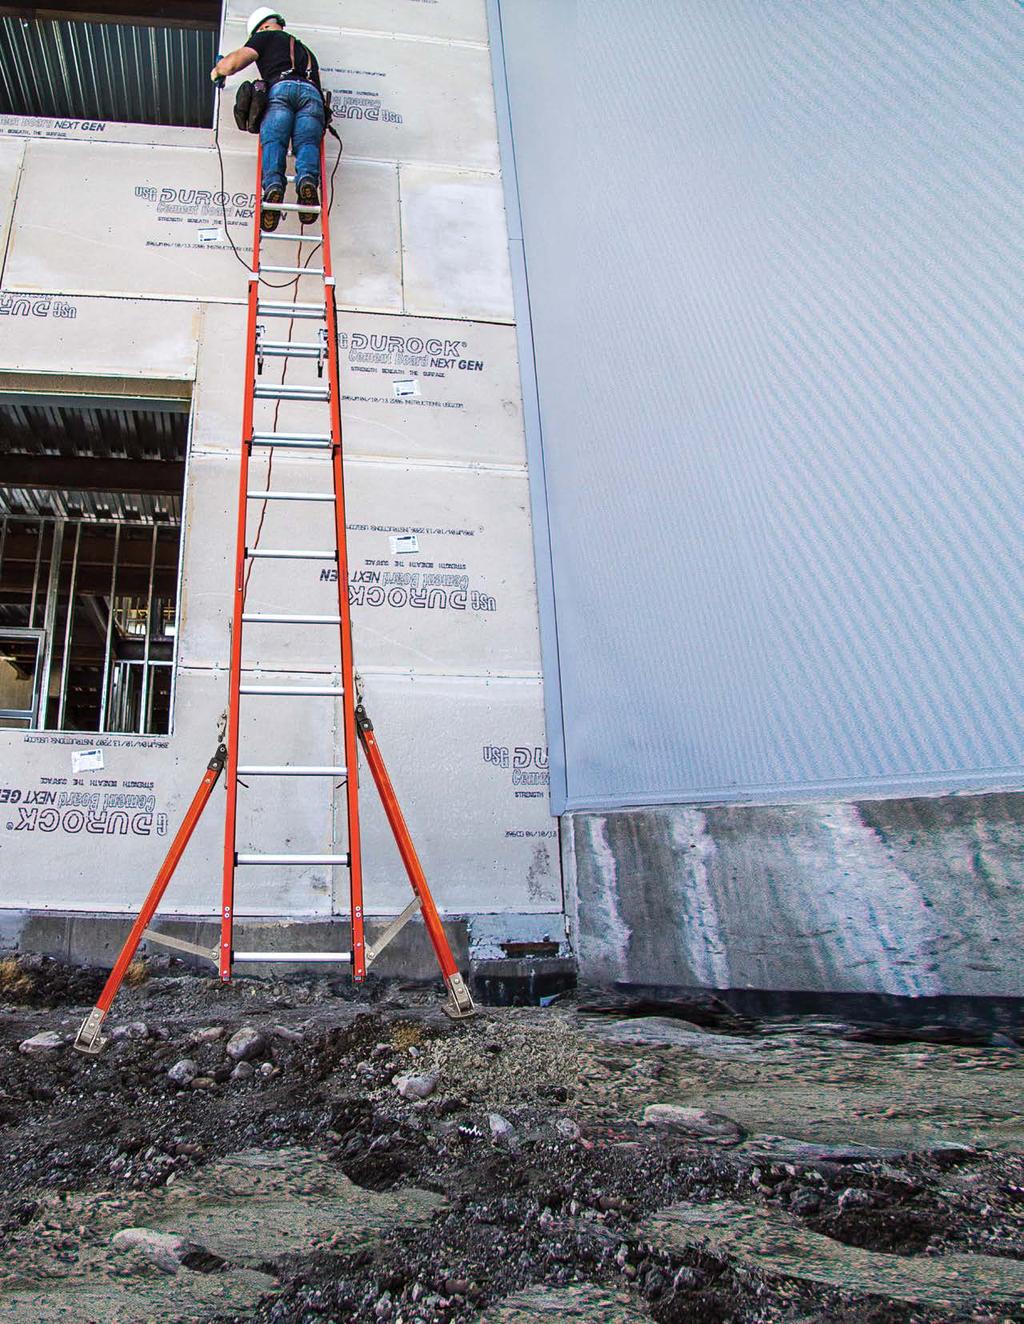 Ladders and Uneven Ground Don t Mix Few, if any, job sites are perfectly level. To save time, operators often improvise leveling methods like bricks, boards, or rocks that are unstable and unsafe.